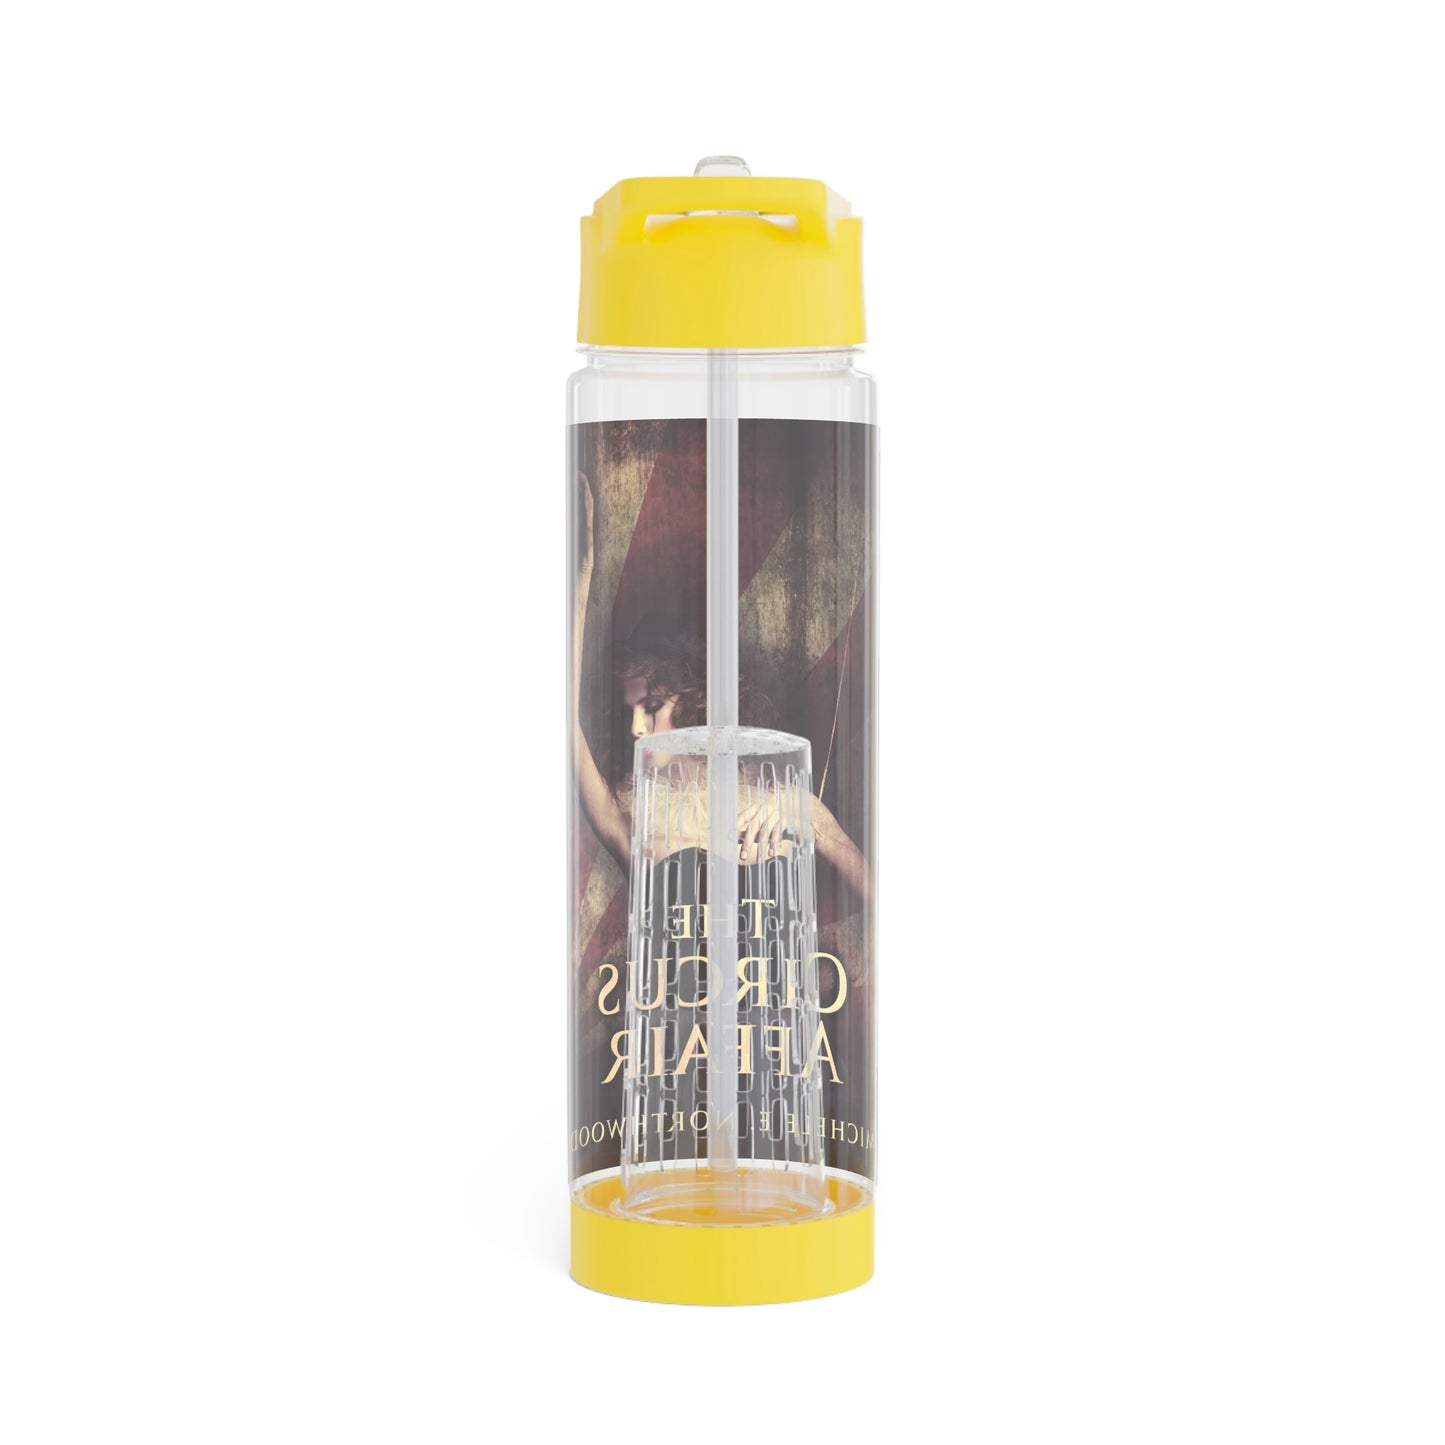 The Circus Affair - Infuser Water Bottle